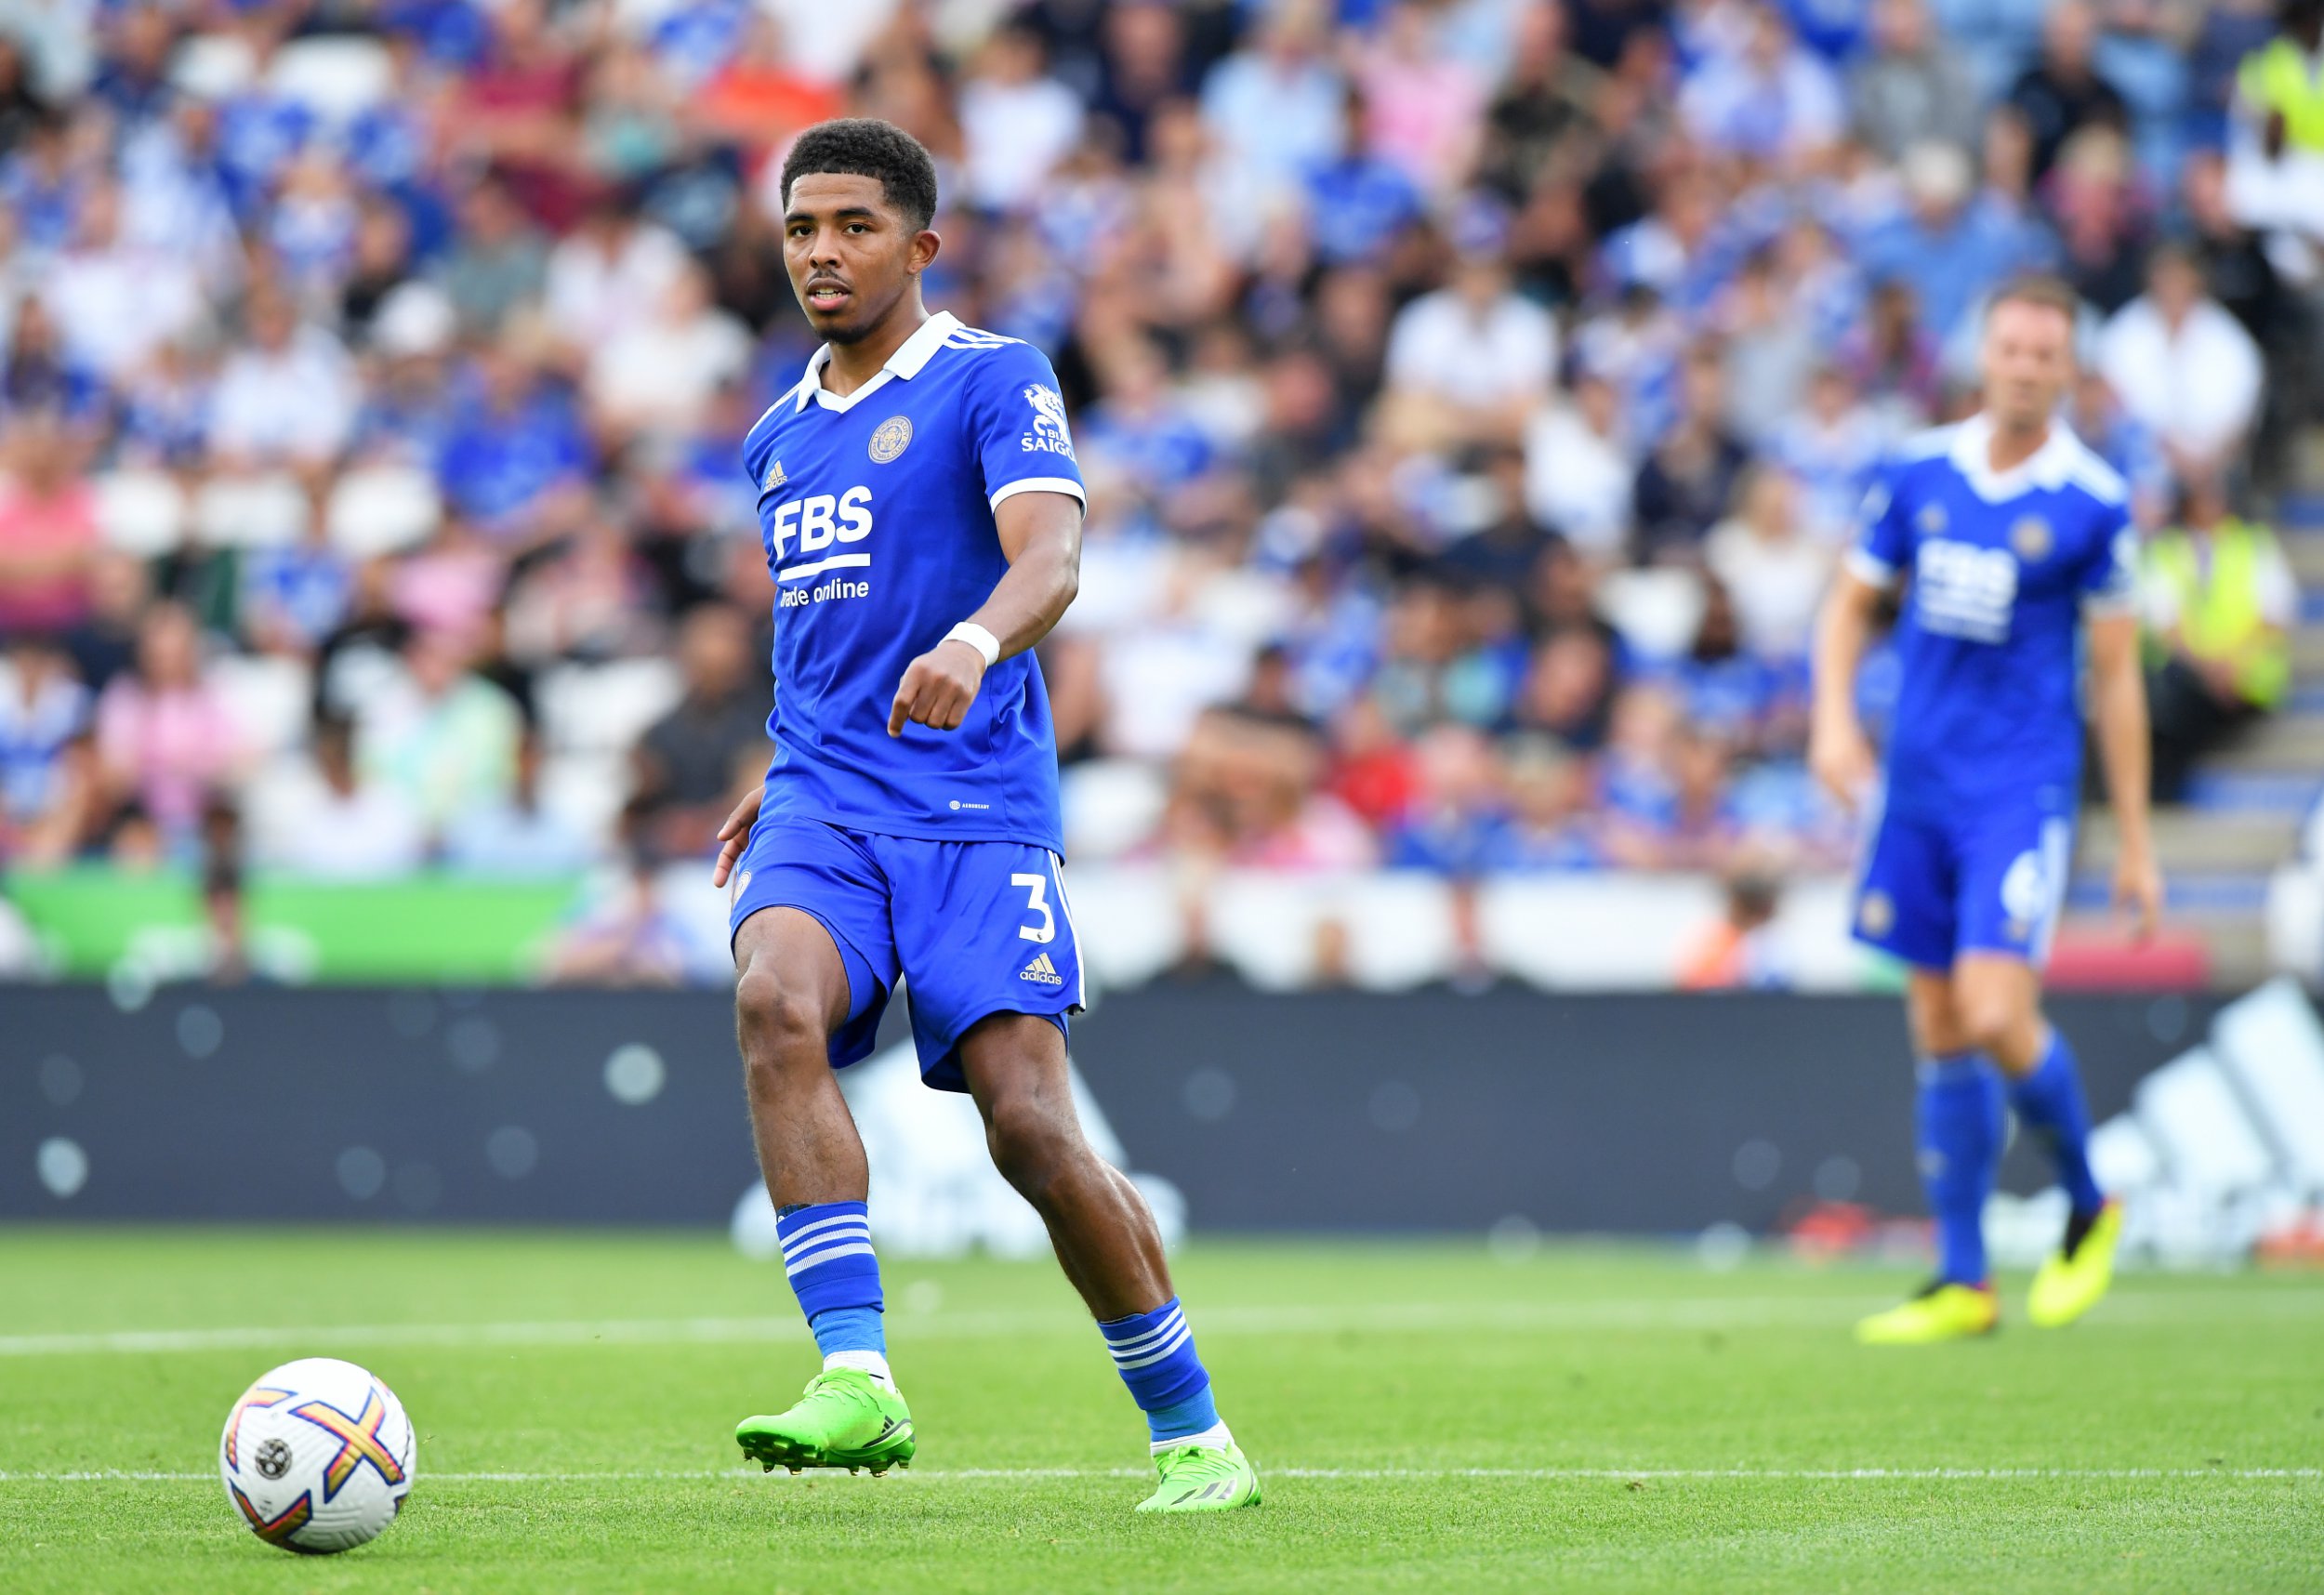 Chelsea signs Wesley Fofana from Leicester City for £75m